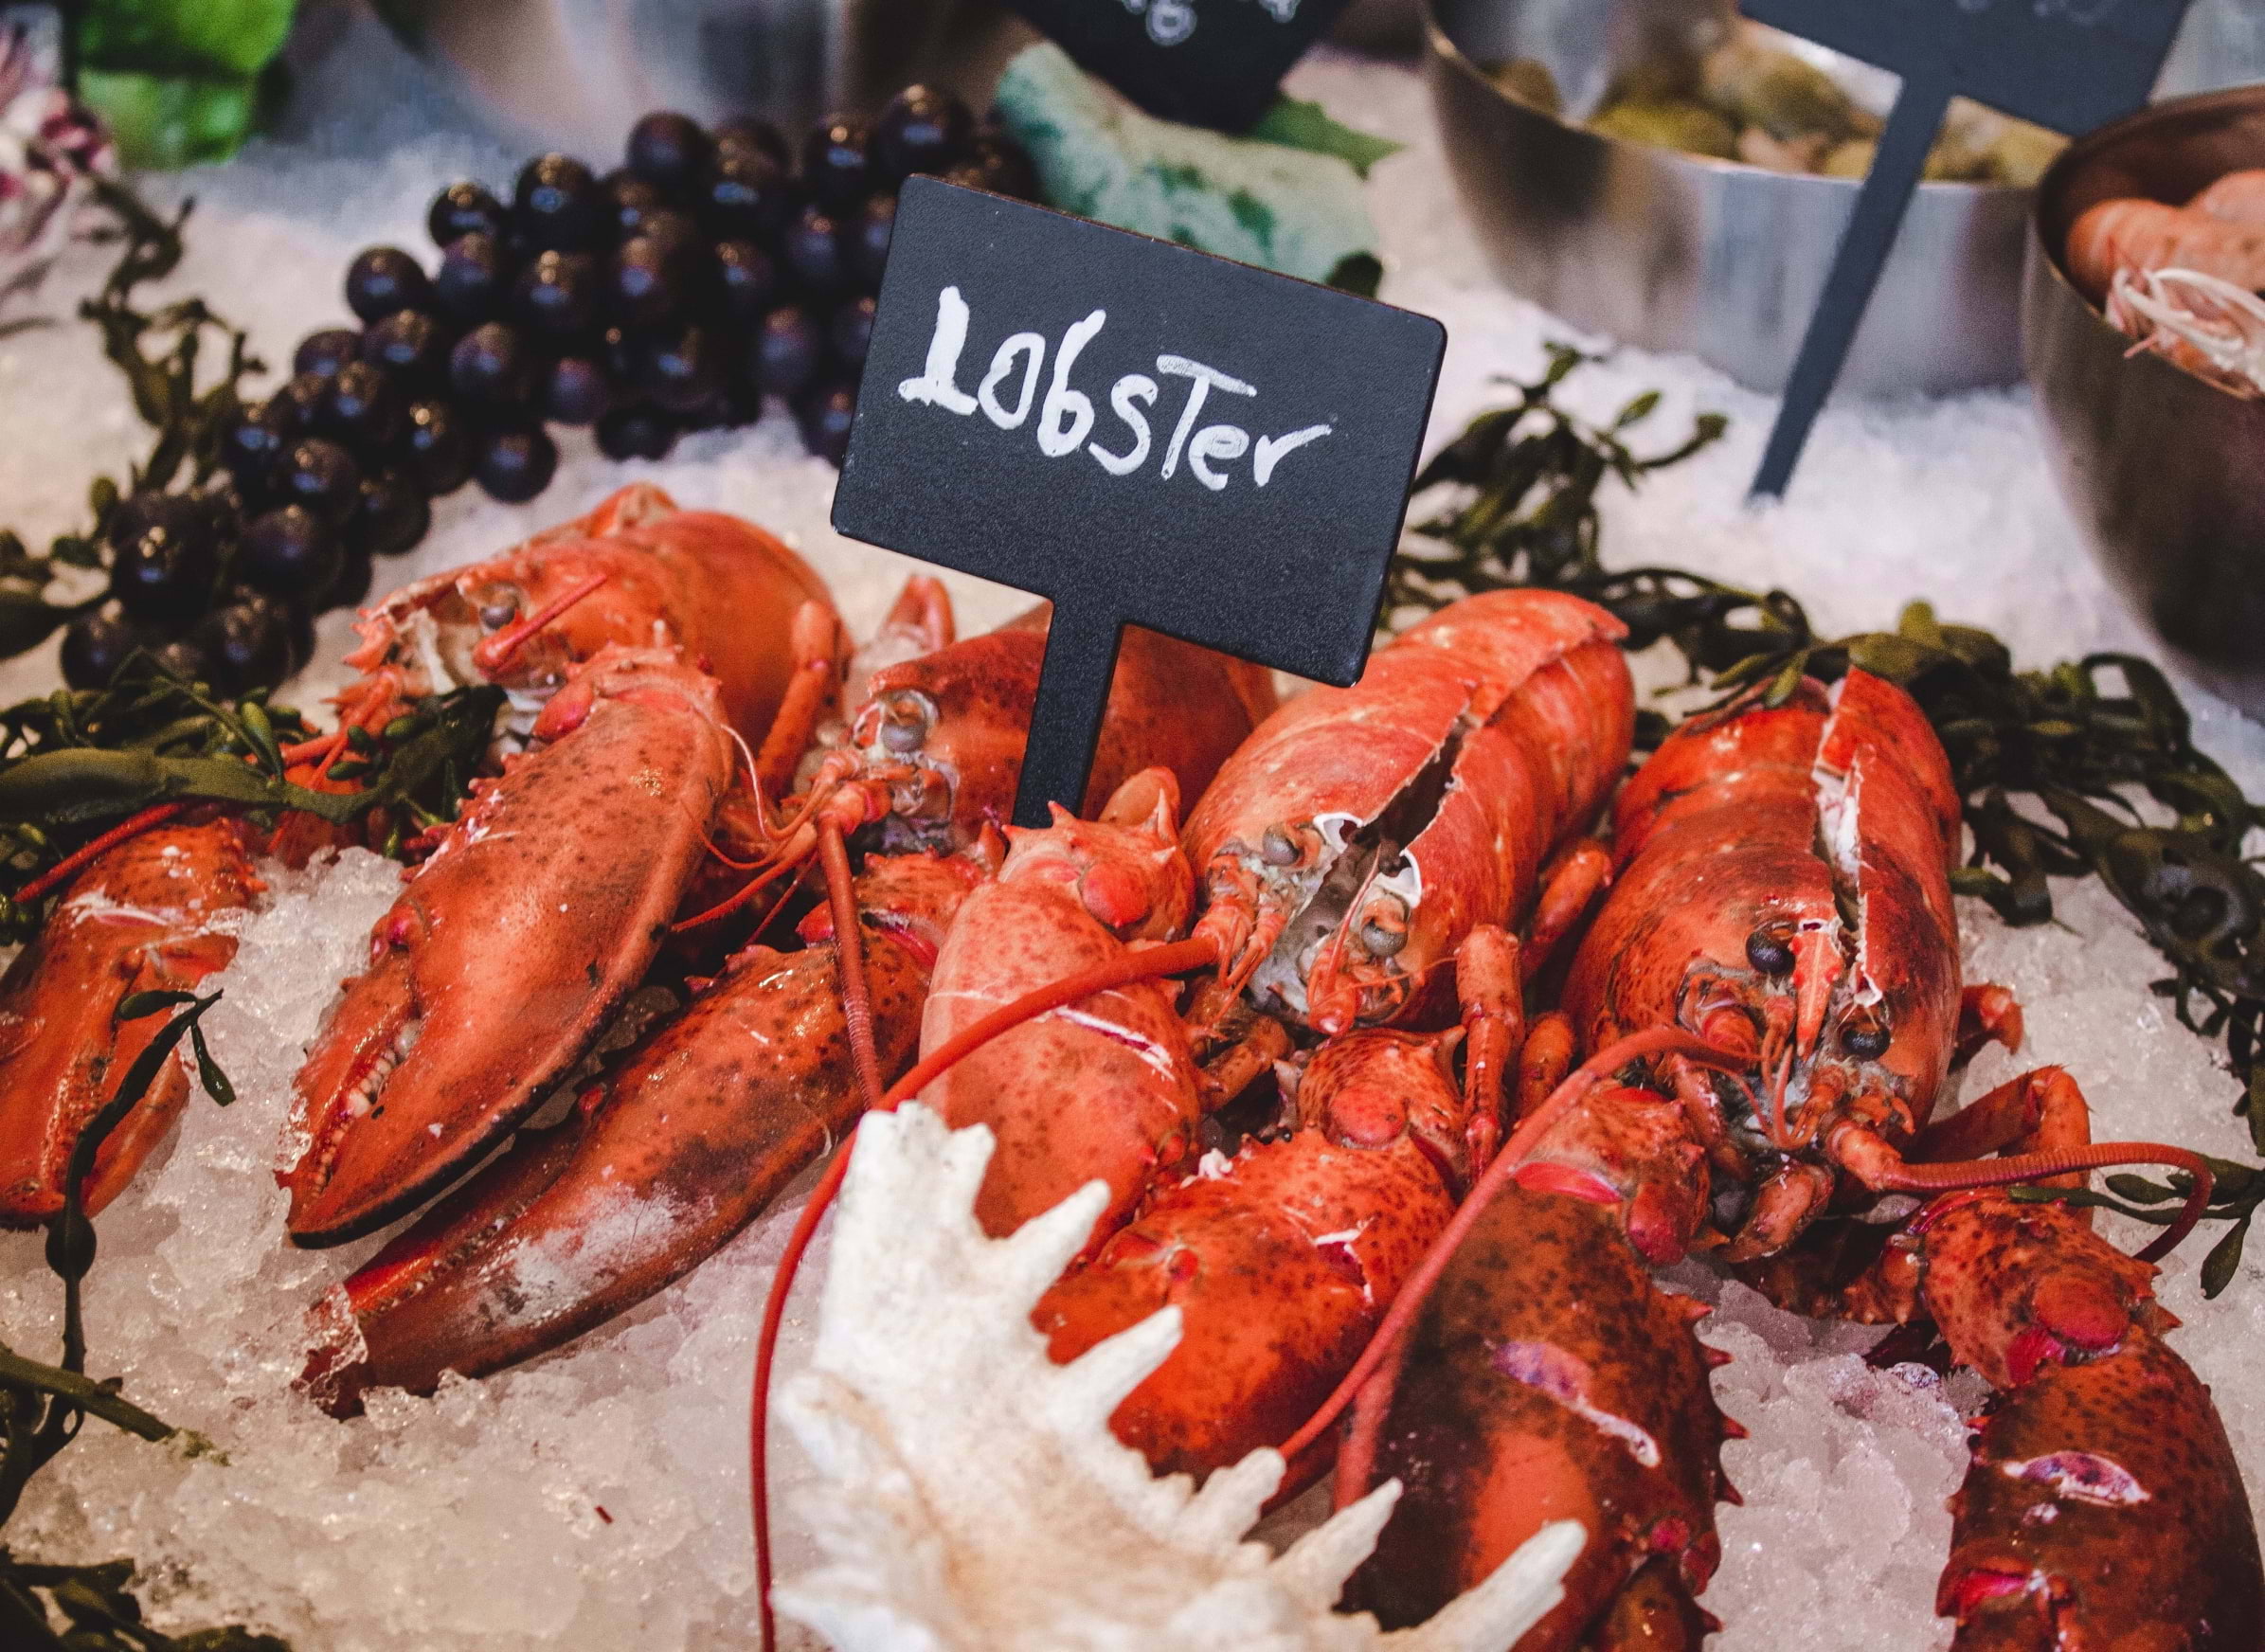 Guide to the best fishmongers in London